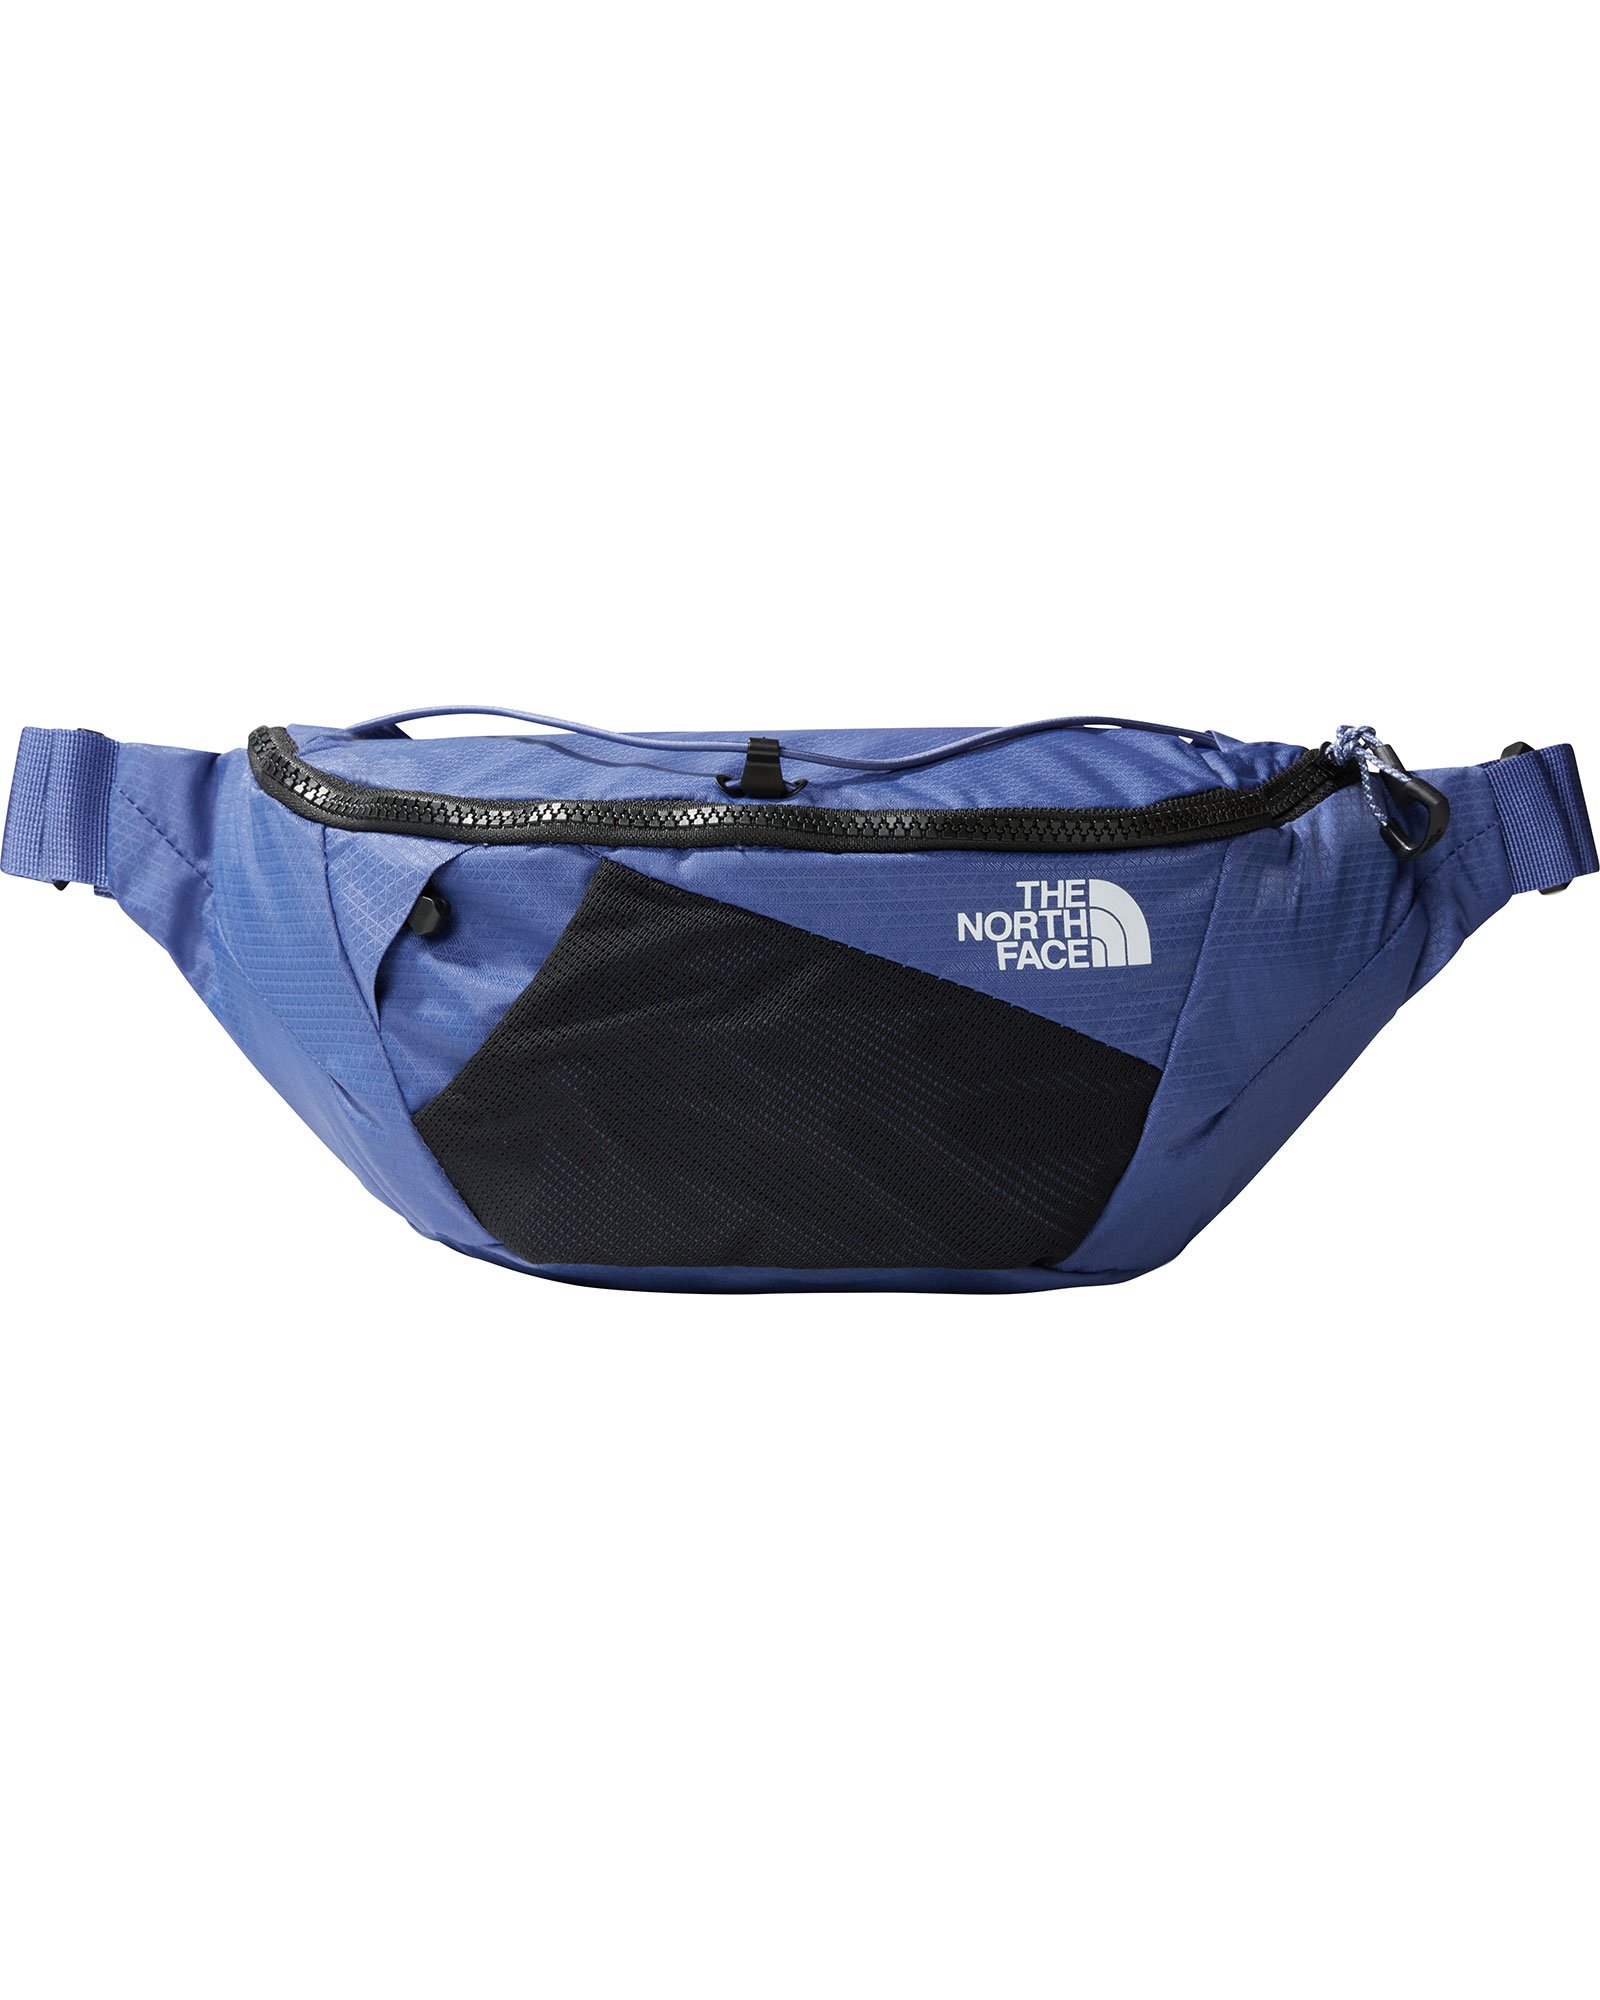 The North Face Lumbnical Hip Pack - Cave Blue